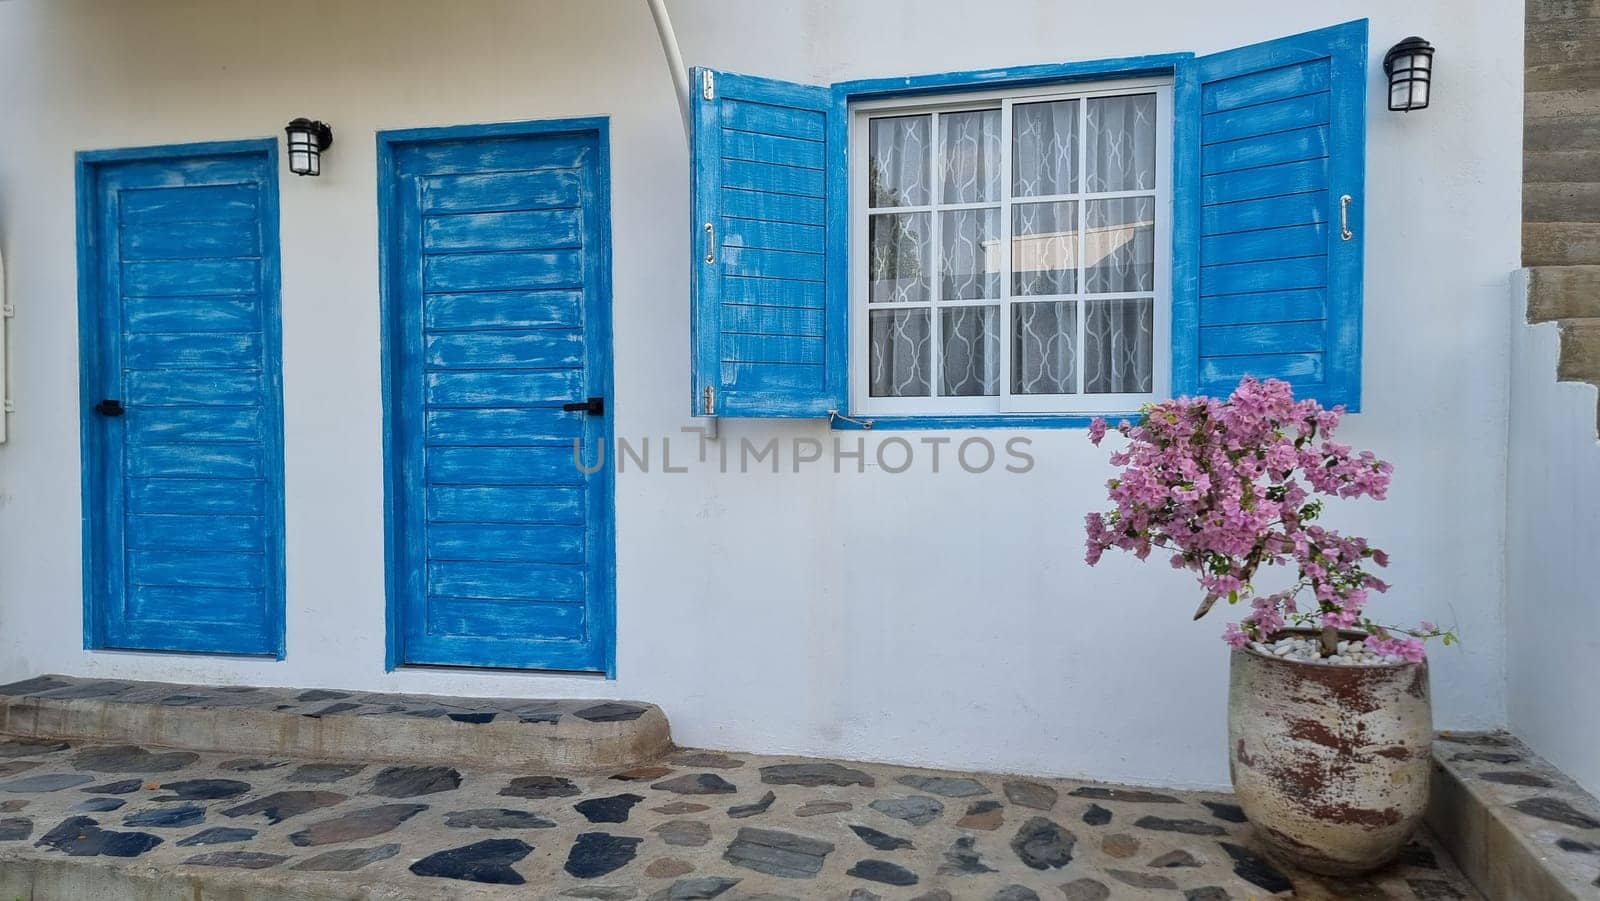 A charming white house with vibrant blue shutters sits gracefully, accented by a flourishing potted plant by fokkebok